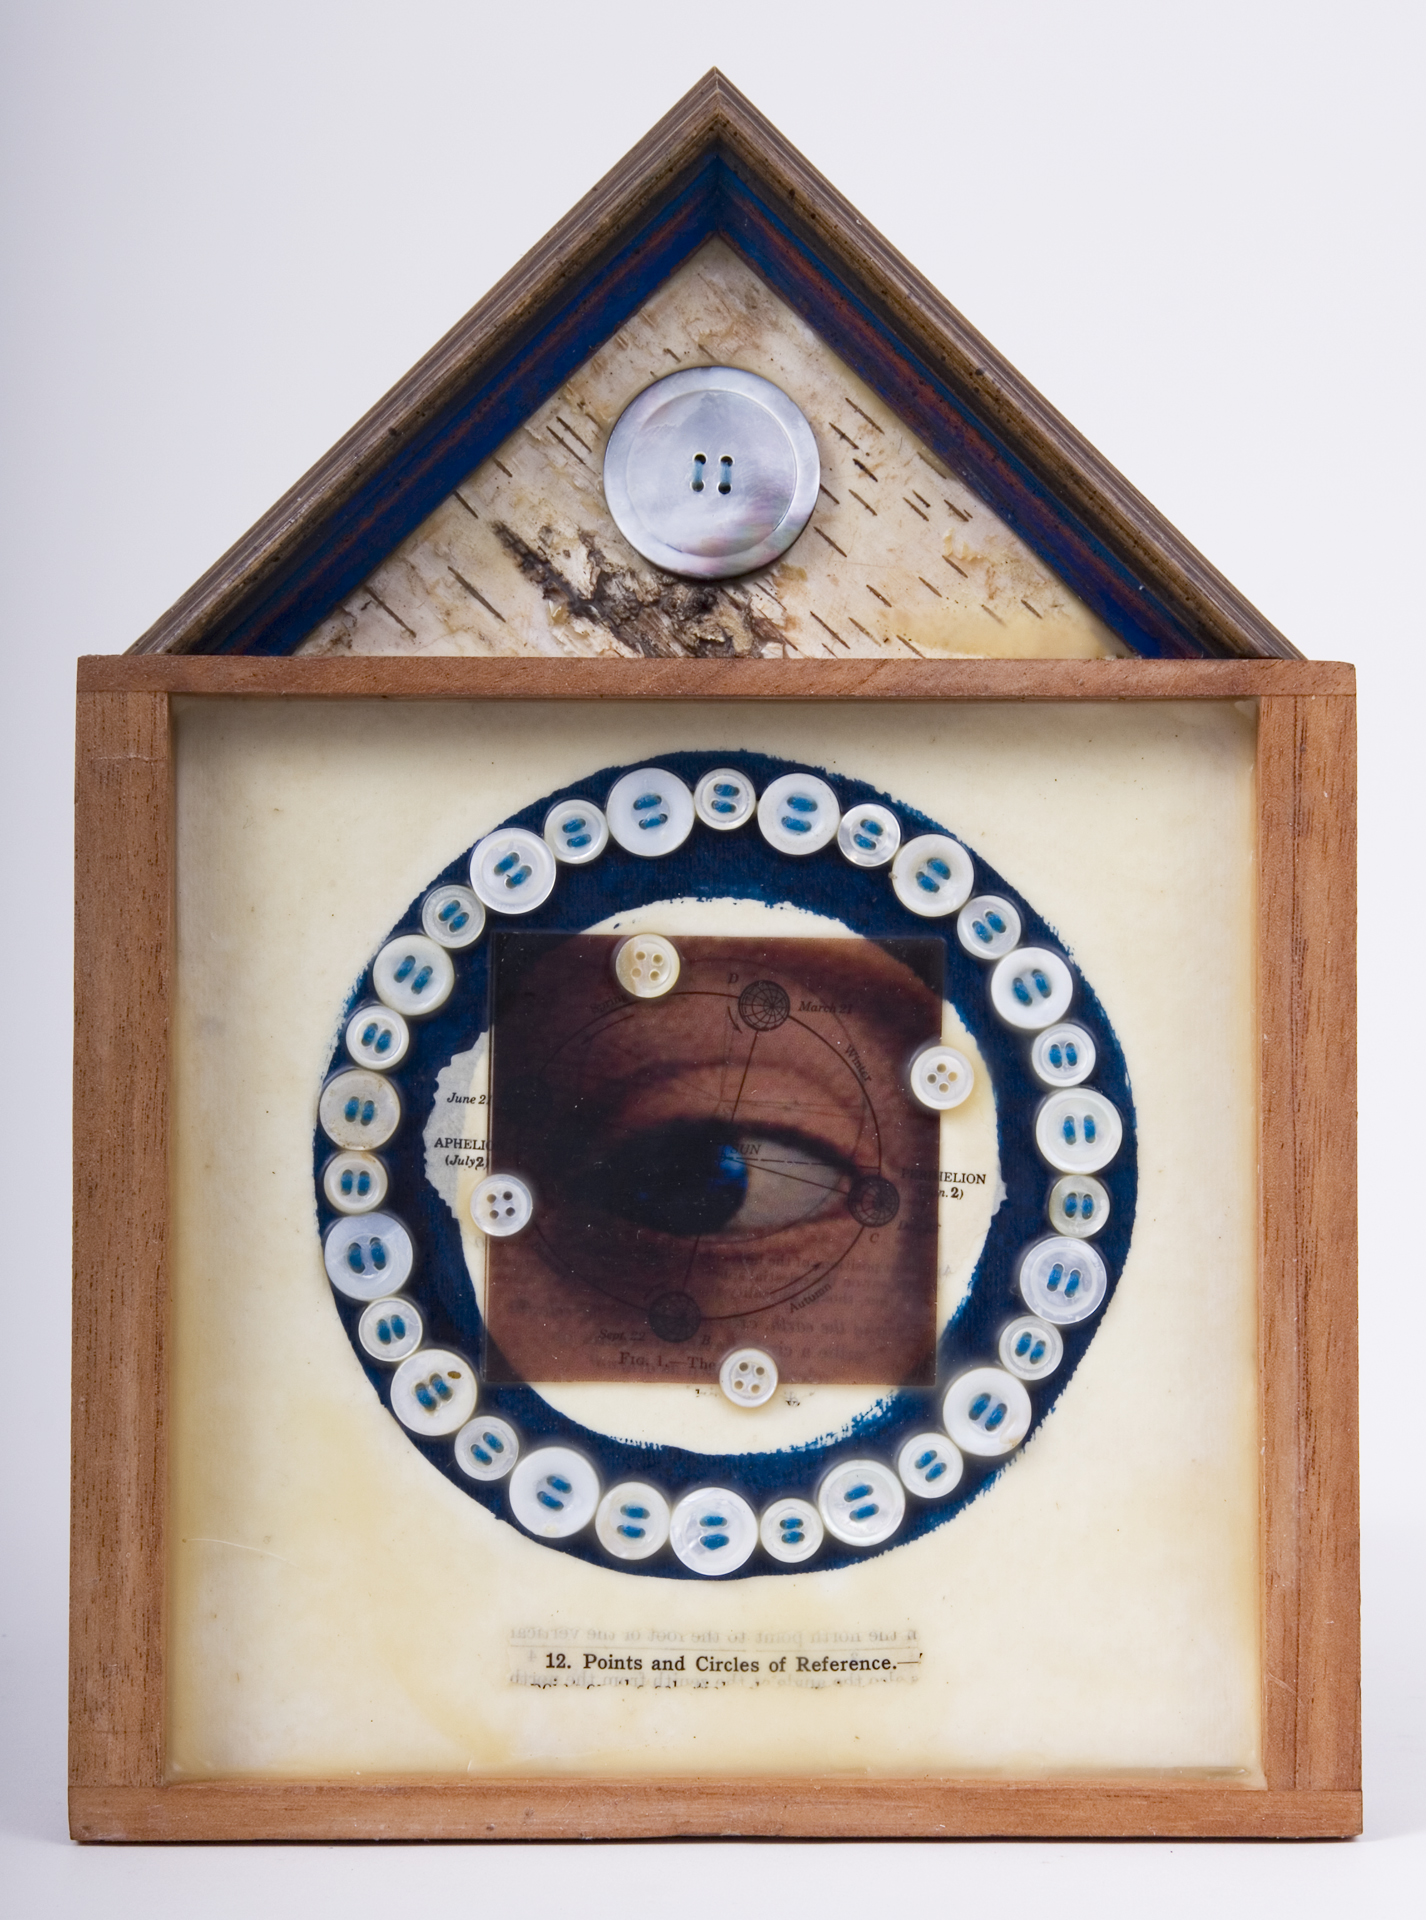 \"12. Points and Circles of Reference\"
mixed-media assemblage
11.5 x 8.5 x 1.5
2009
$85.00
Cigar box, frame sample, birch bark, mother of pearl buttons, transparency, ink, wax, astronomy text on watercolor paper